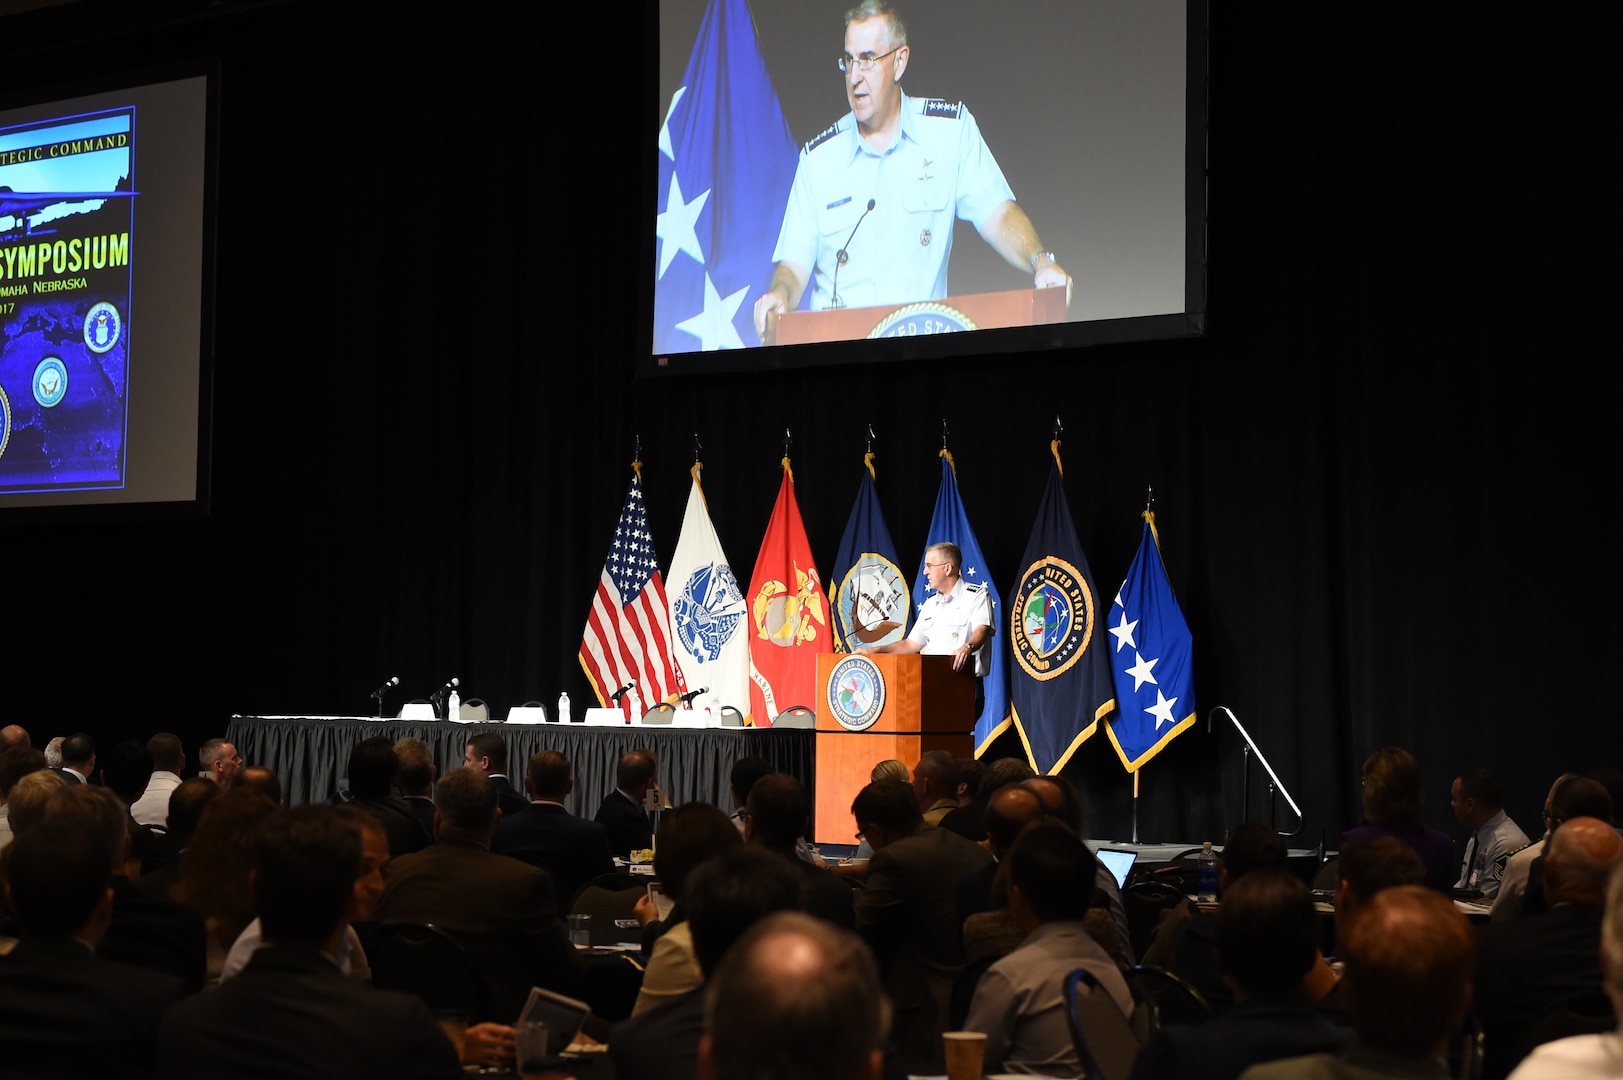 U.S. Air Force Gen. John. E. Hyten, commander of U.S. Strategic Command (USSTRATCOM), welcomes attendees to USSTRATCOM’s  annual Deterrence Symposium at the CenturyLink Center, Omaha, Neb., July 26, 2017. During the two-day symposium, industry, military, governmental, international and academic experts discussed and promoted increased collaboration to address 21st century strategic deterrence.  One of nine Department of Defense unified combatant commands, USSTRATCOM has global strategic missions assigned through the Unified Command Plan that include strategic deterrence, space operations, cyberspace operations, joint electronic warfare, global strike, missile defense, intelligence, and analysis and targeting. 